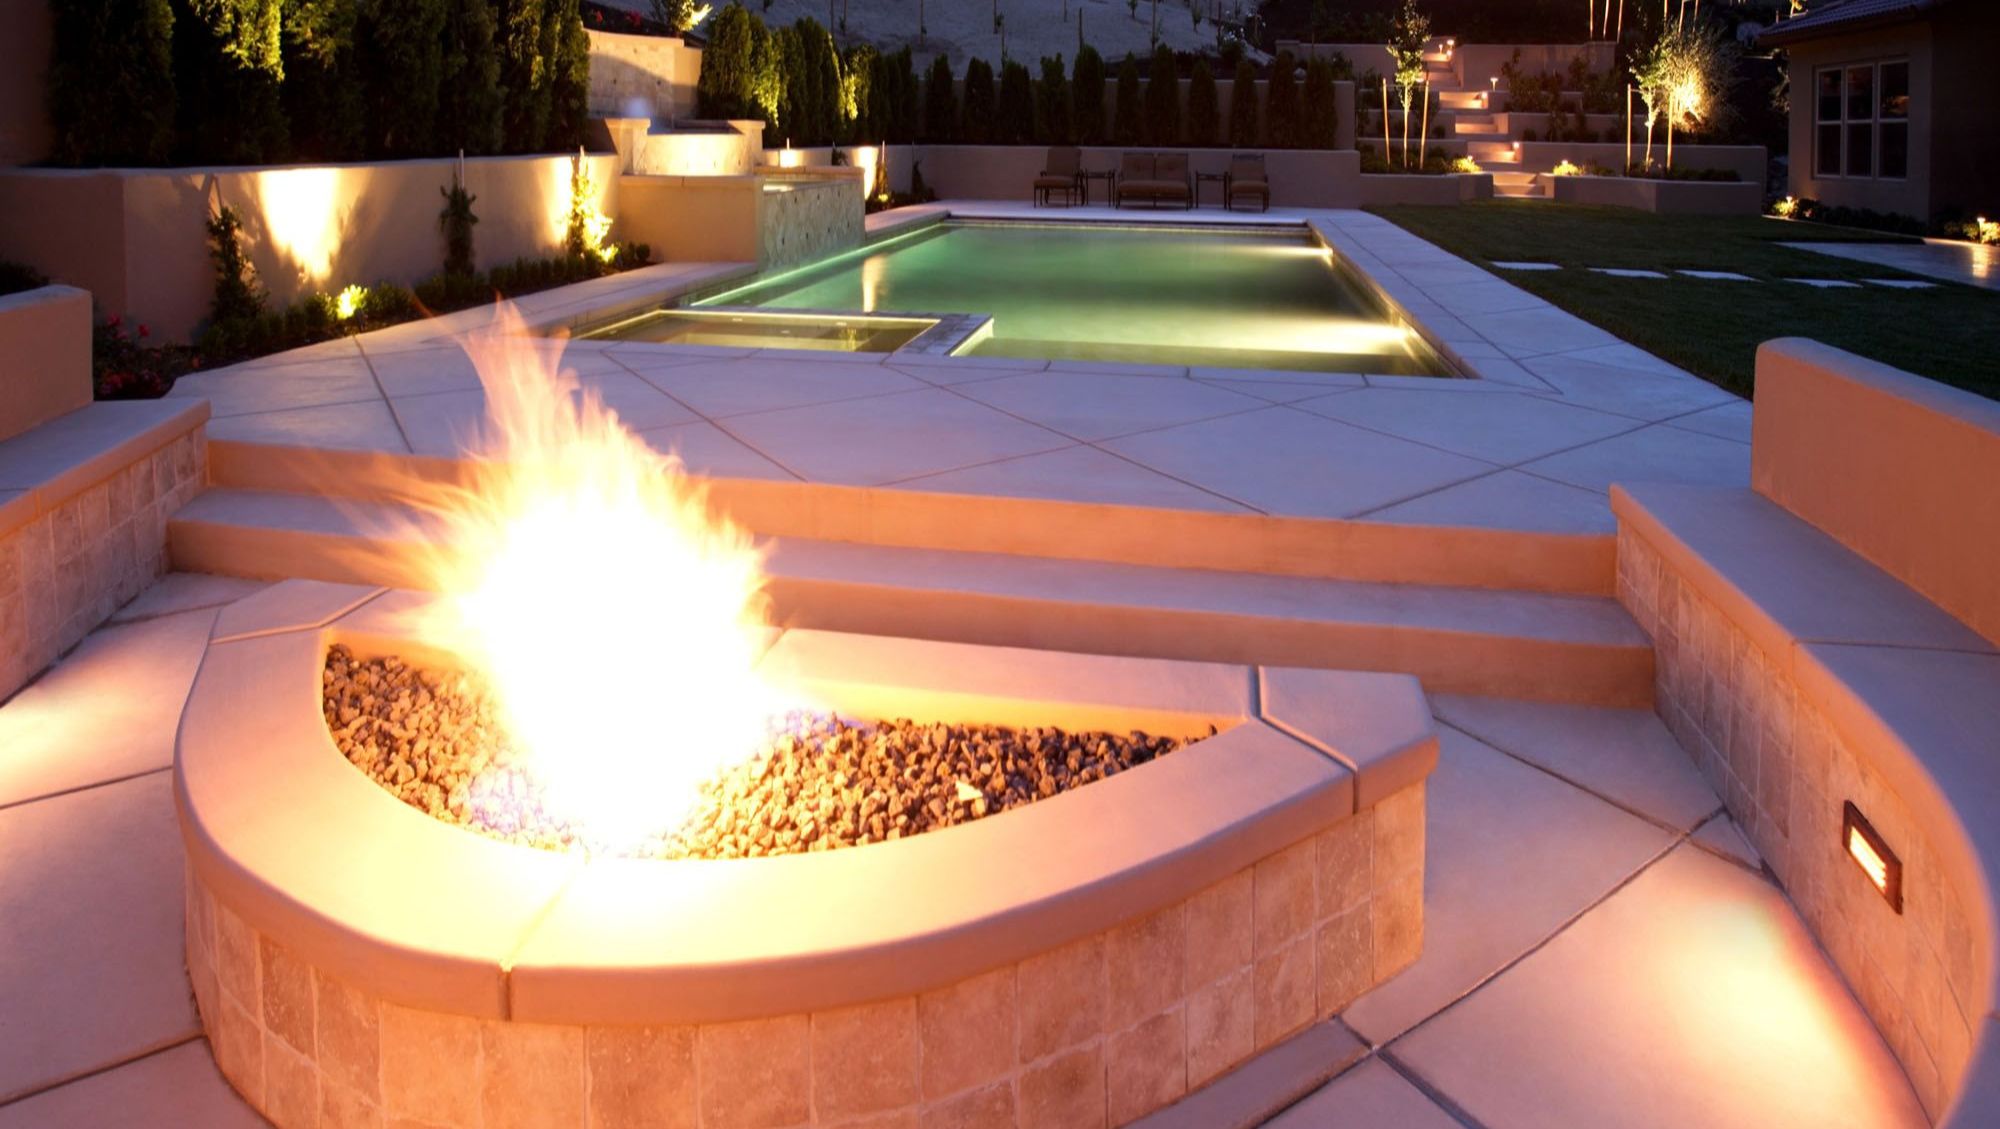 Propane heated pool and fire pit